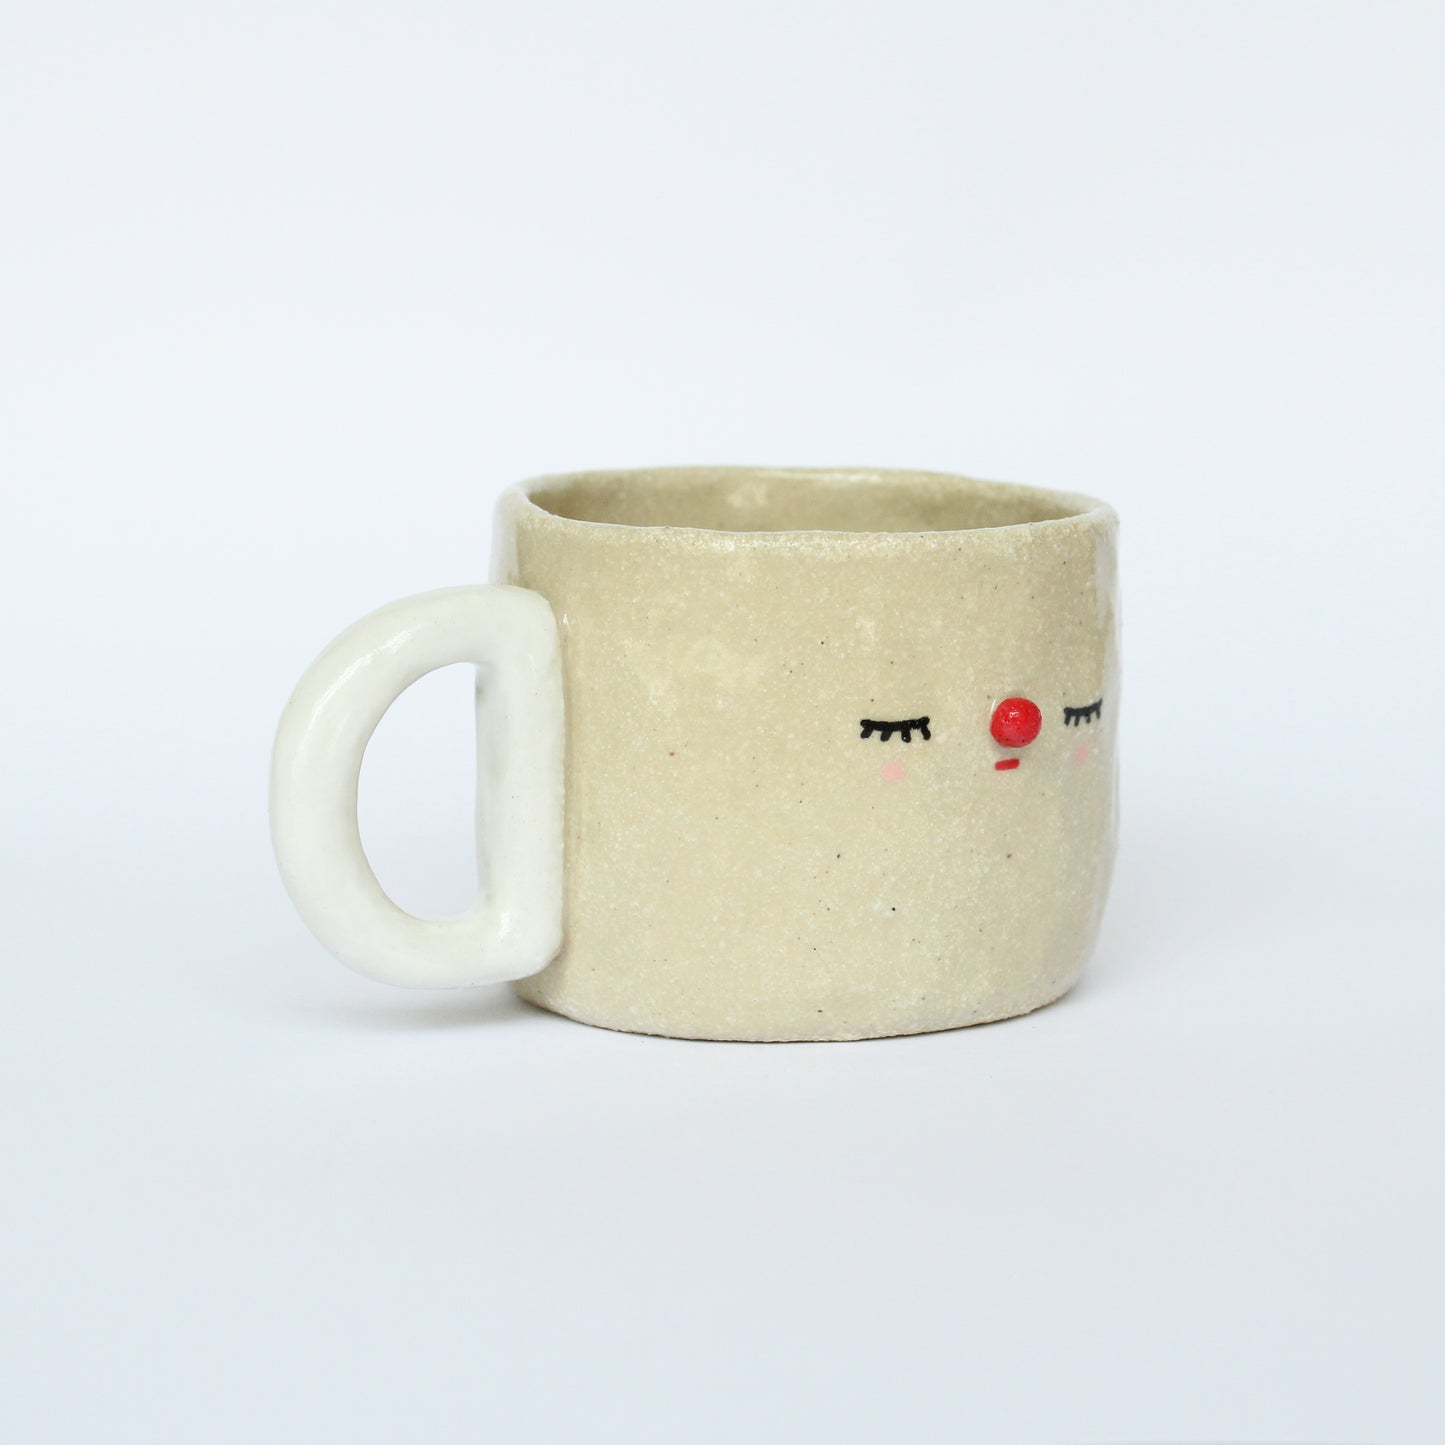 Pierrot pinched cup - white handle